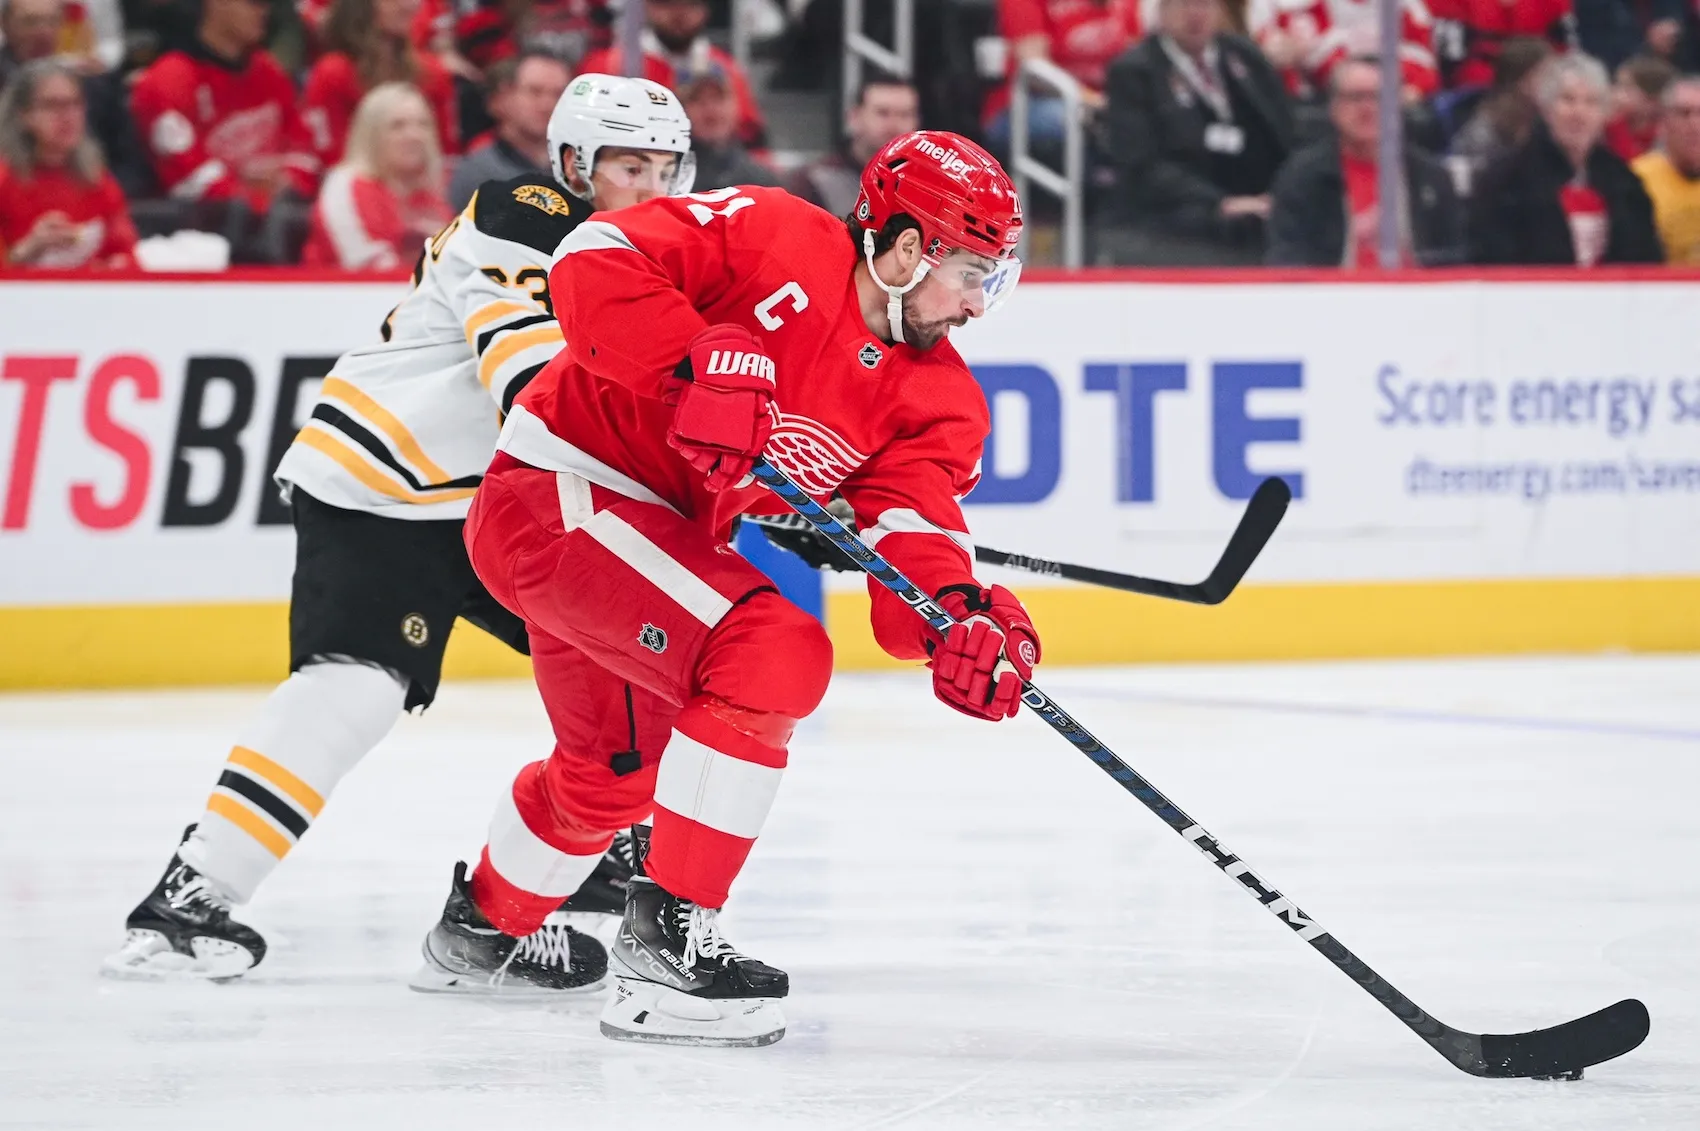 Mar 12, 2023; Detroit, Michigan, USA; Detroit Red Wings center Dylan Larkin (71) brings the puck up ice against Boston Bruins left wing Brad Marchand (63) during the first period at Little Caesars Arena. Mandatory Credit: Tim Fuller-USA TODAY Sports